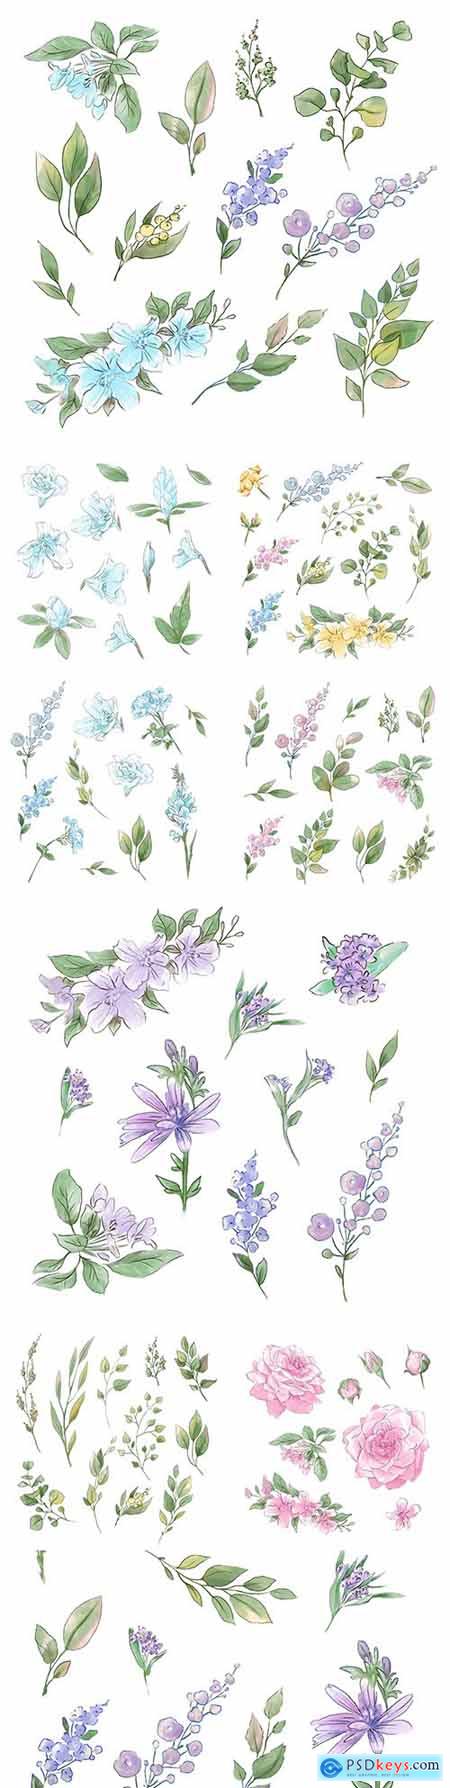 Flowers and twigs with leaves watercolor design illustrations